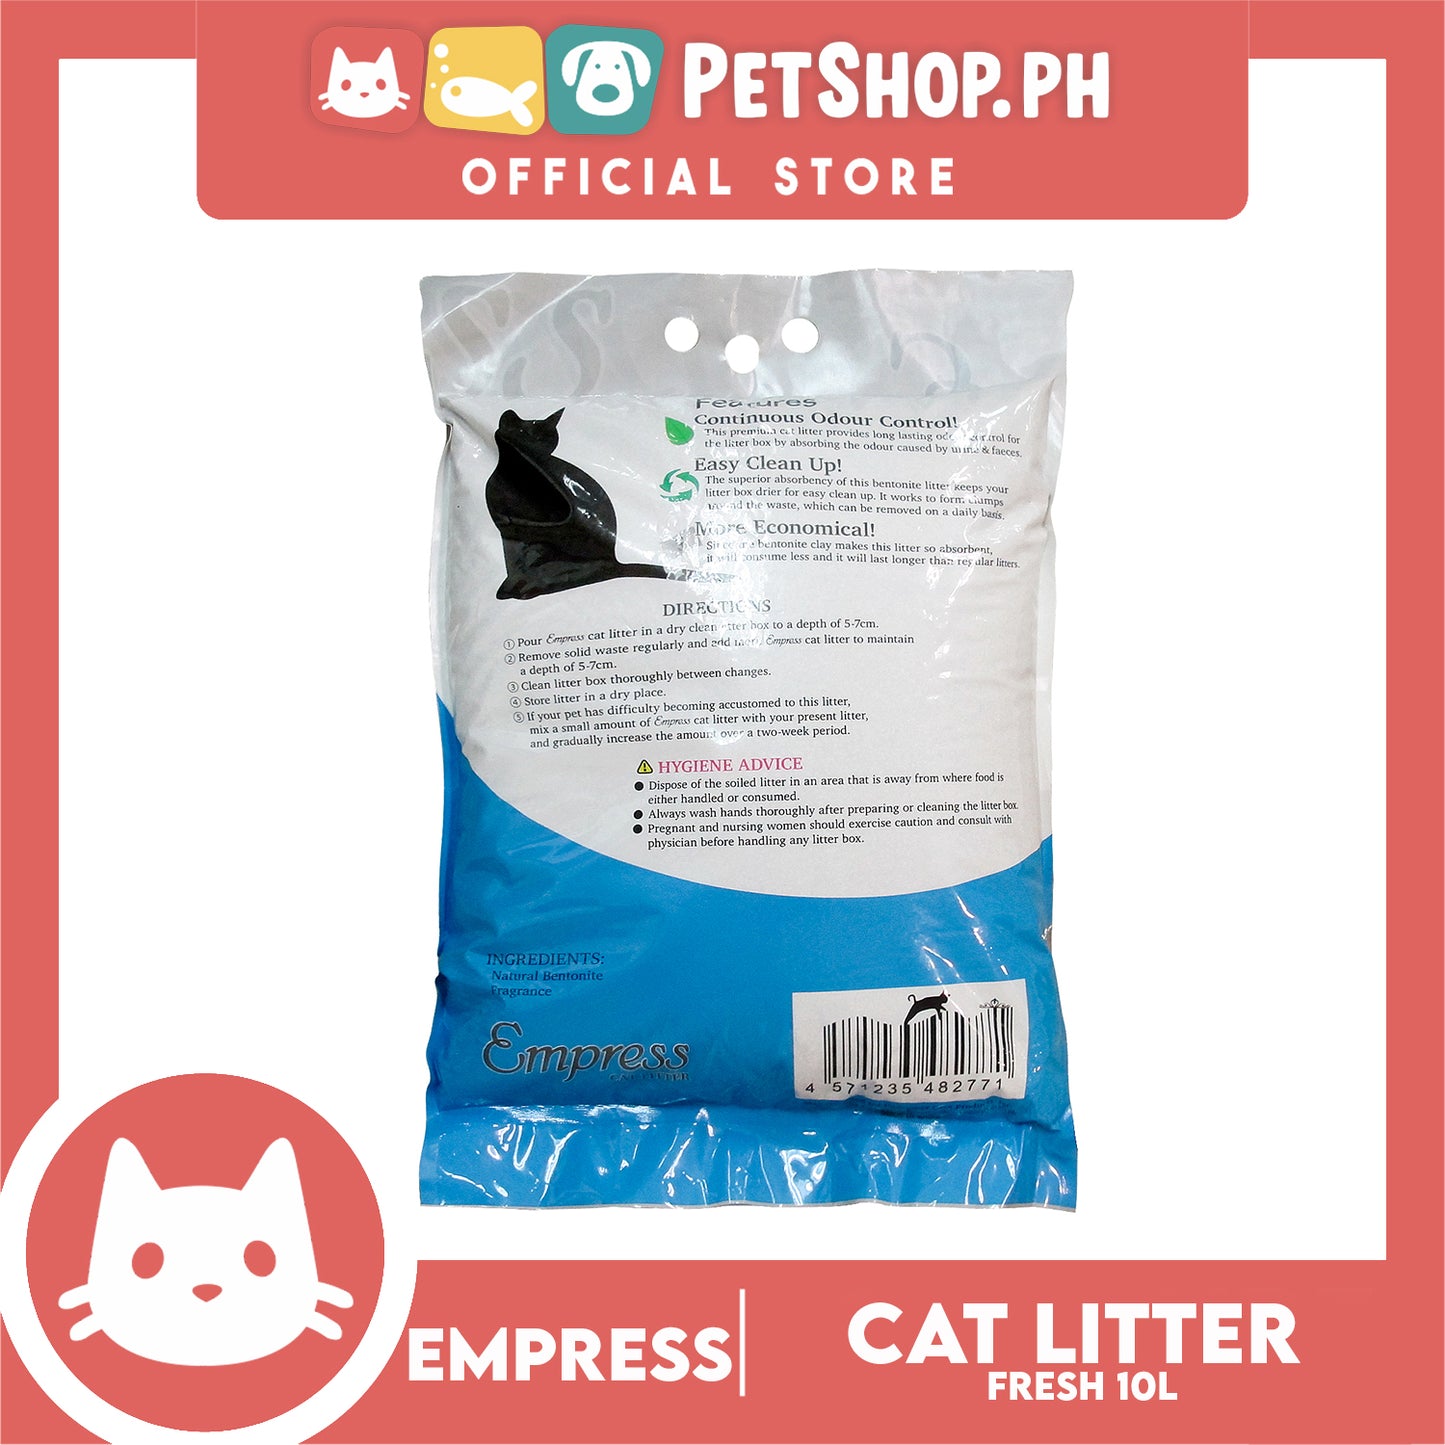 Empress Cat Litter 10 Liters (Fresh Scent) Strong Clumping, Eliminates Odors, 99% Dust Free, 100% Natural Cat Litter